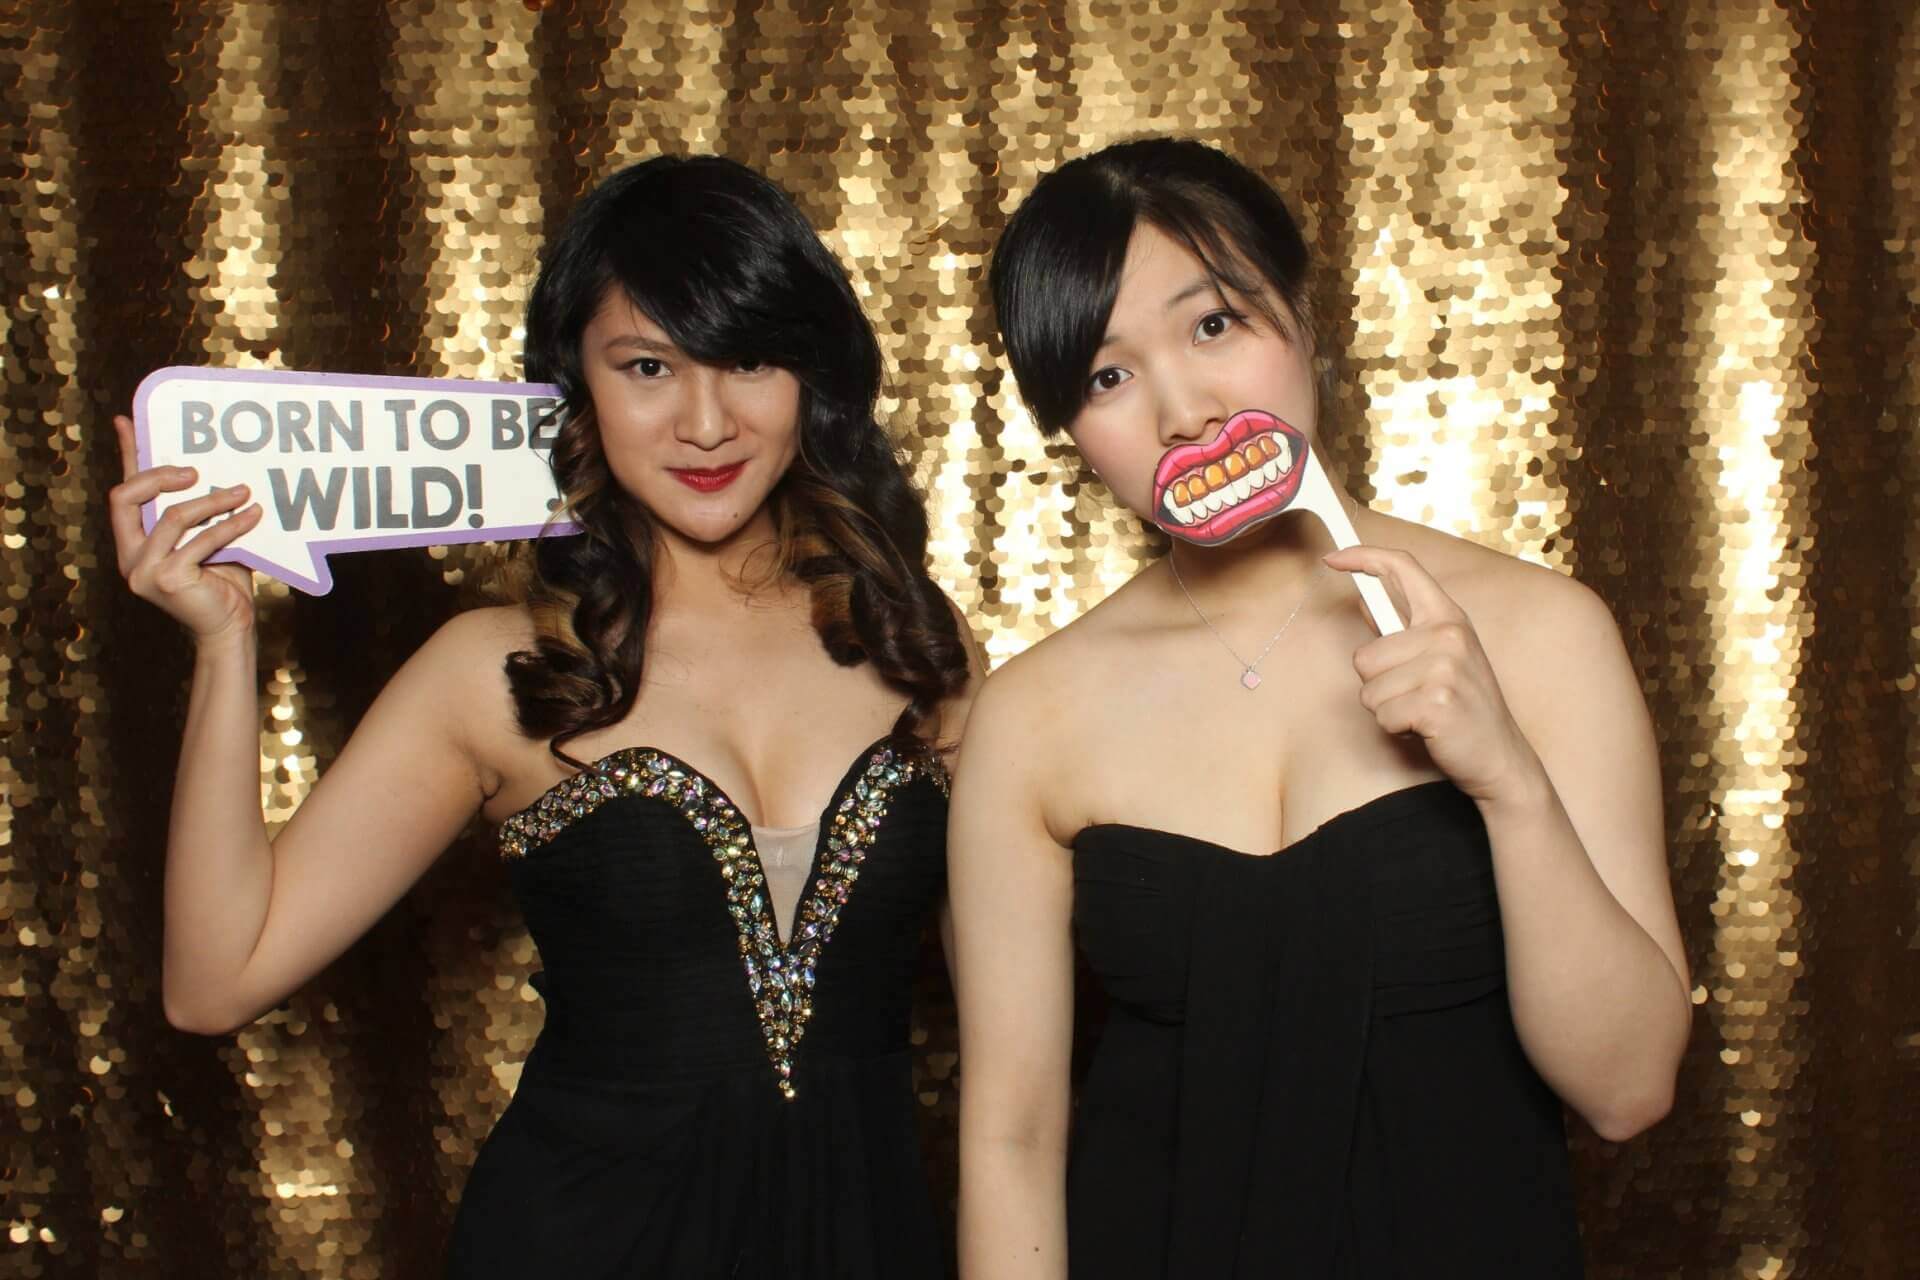 Photo booth rental in Toronto for an event. Posing in front of a beautiful gold scale backdrop offered by LOL Photo Booth. Tags: Event planning ideas, Photo booth prints, high resolution photos, Toronto photo booth rental services. GIFS, Boomerangs, Mosaic Walls, Slow motion, brand activation.